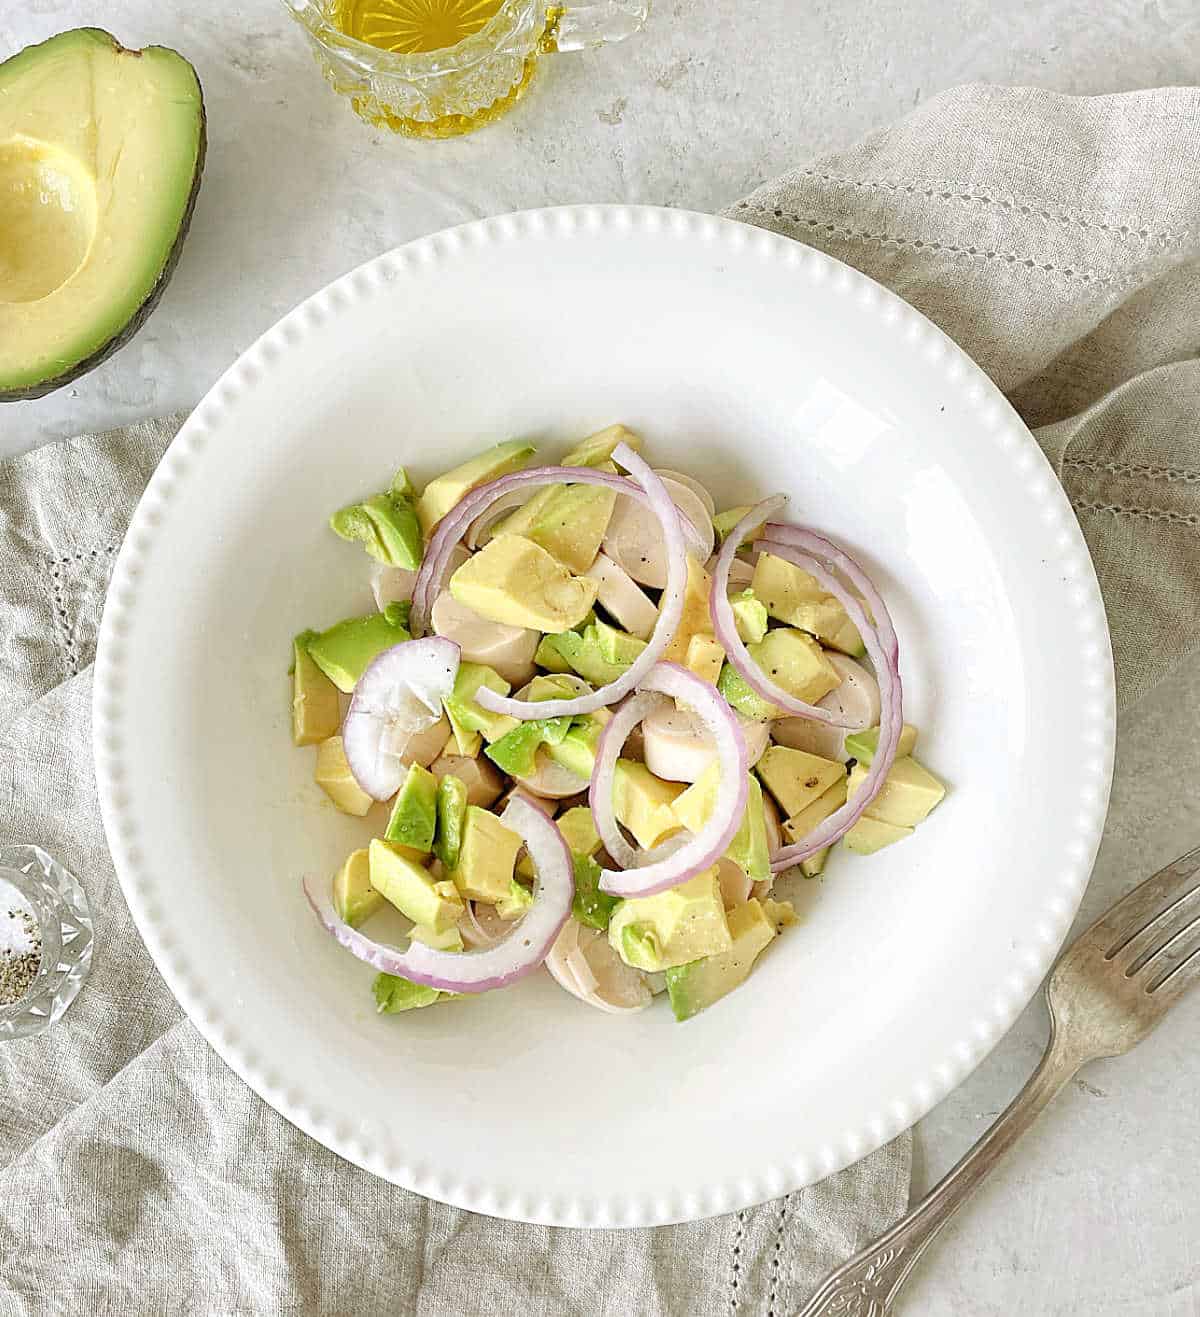 Layer of avocado, red onion, and heart of palm salad in a white plate on a grey surface.